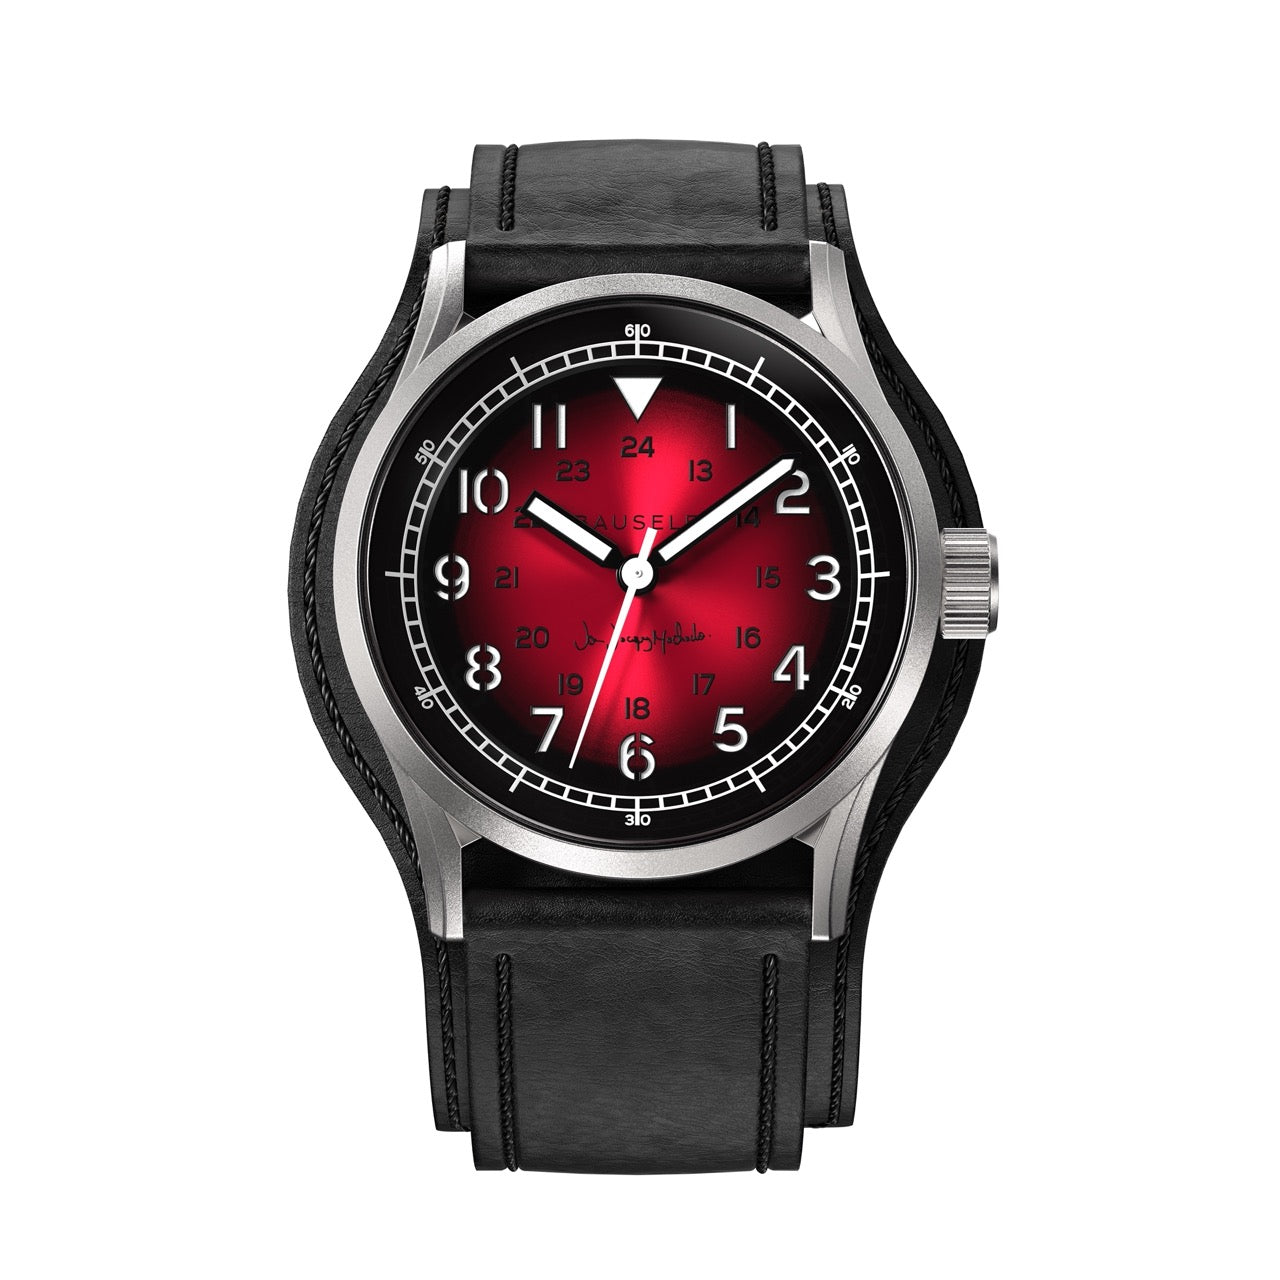 JEAN JACQUES MACHADO Limited Edition watch | Pre Order